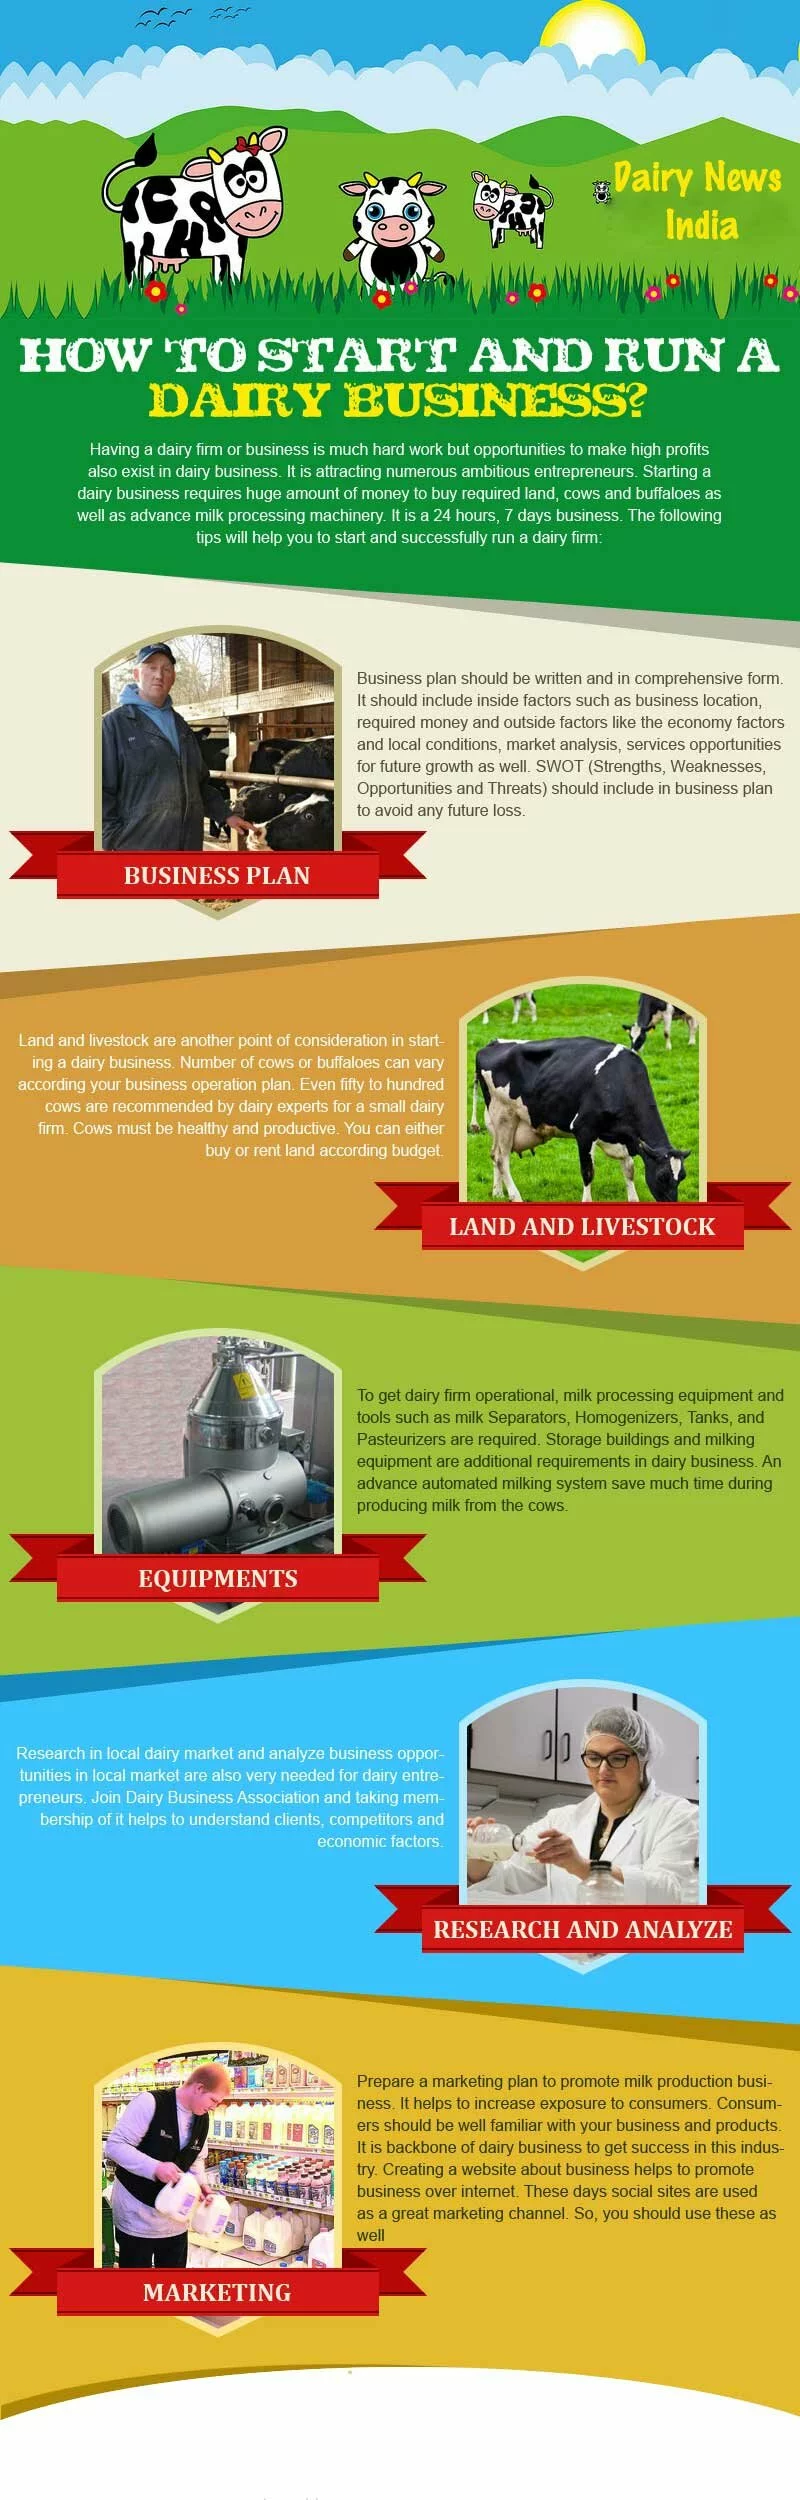 How To Start And Run A Dairy Business